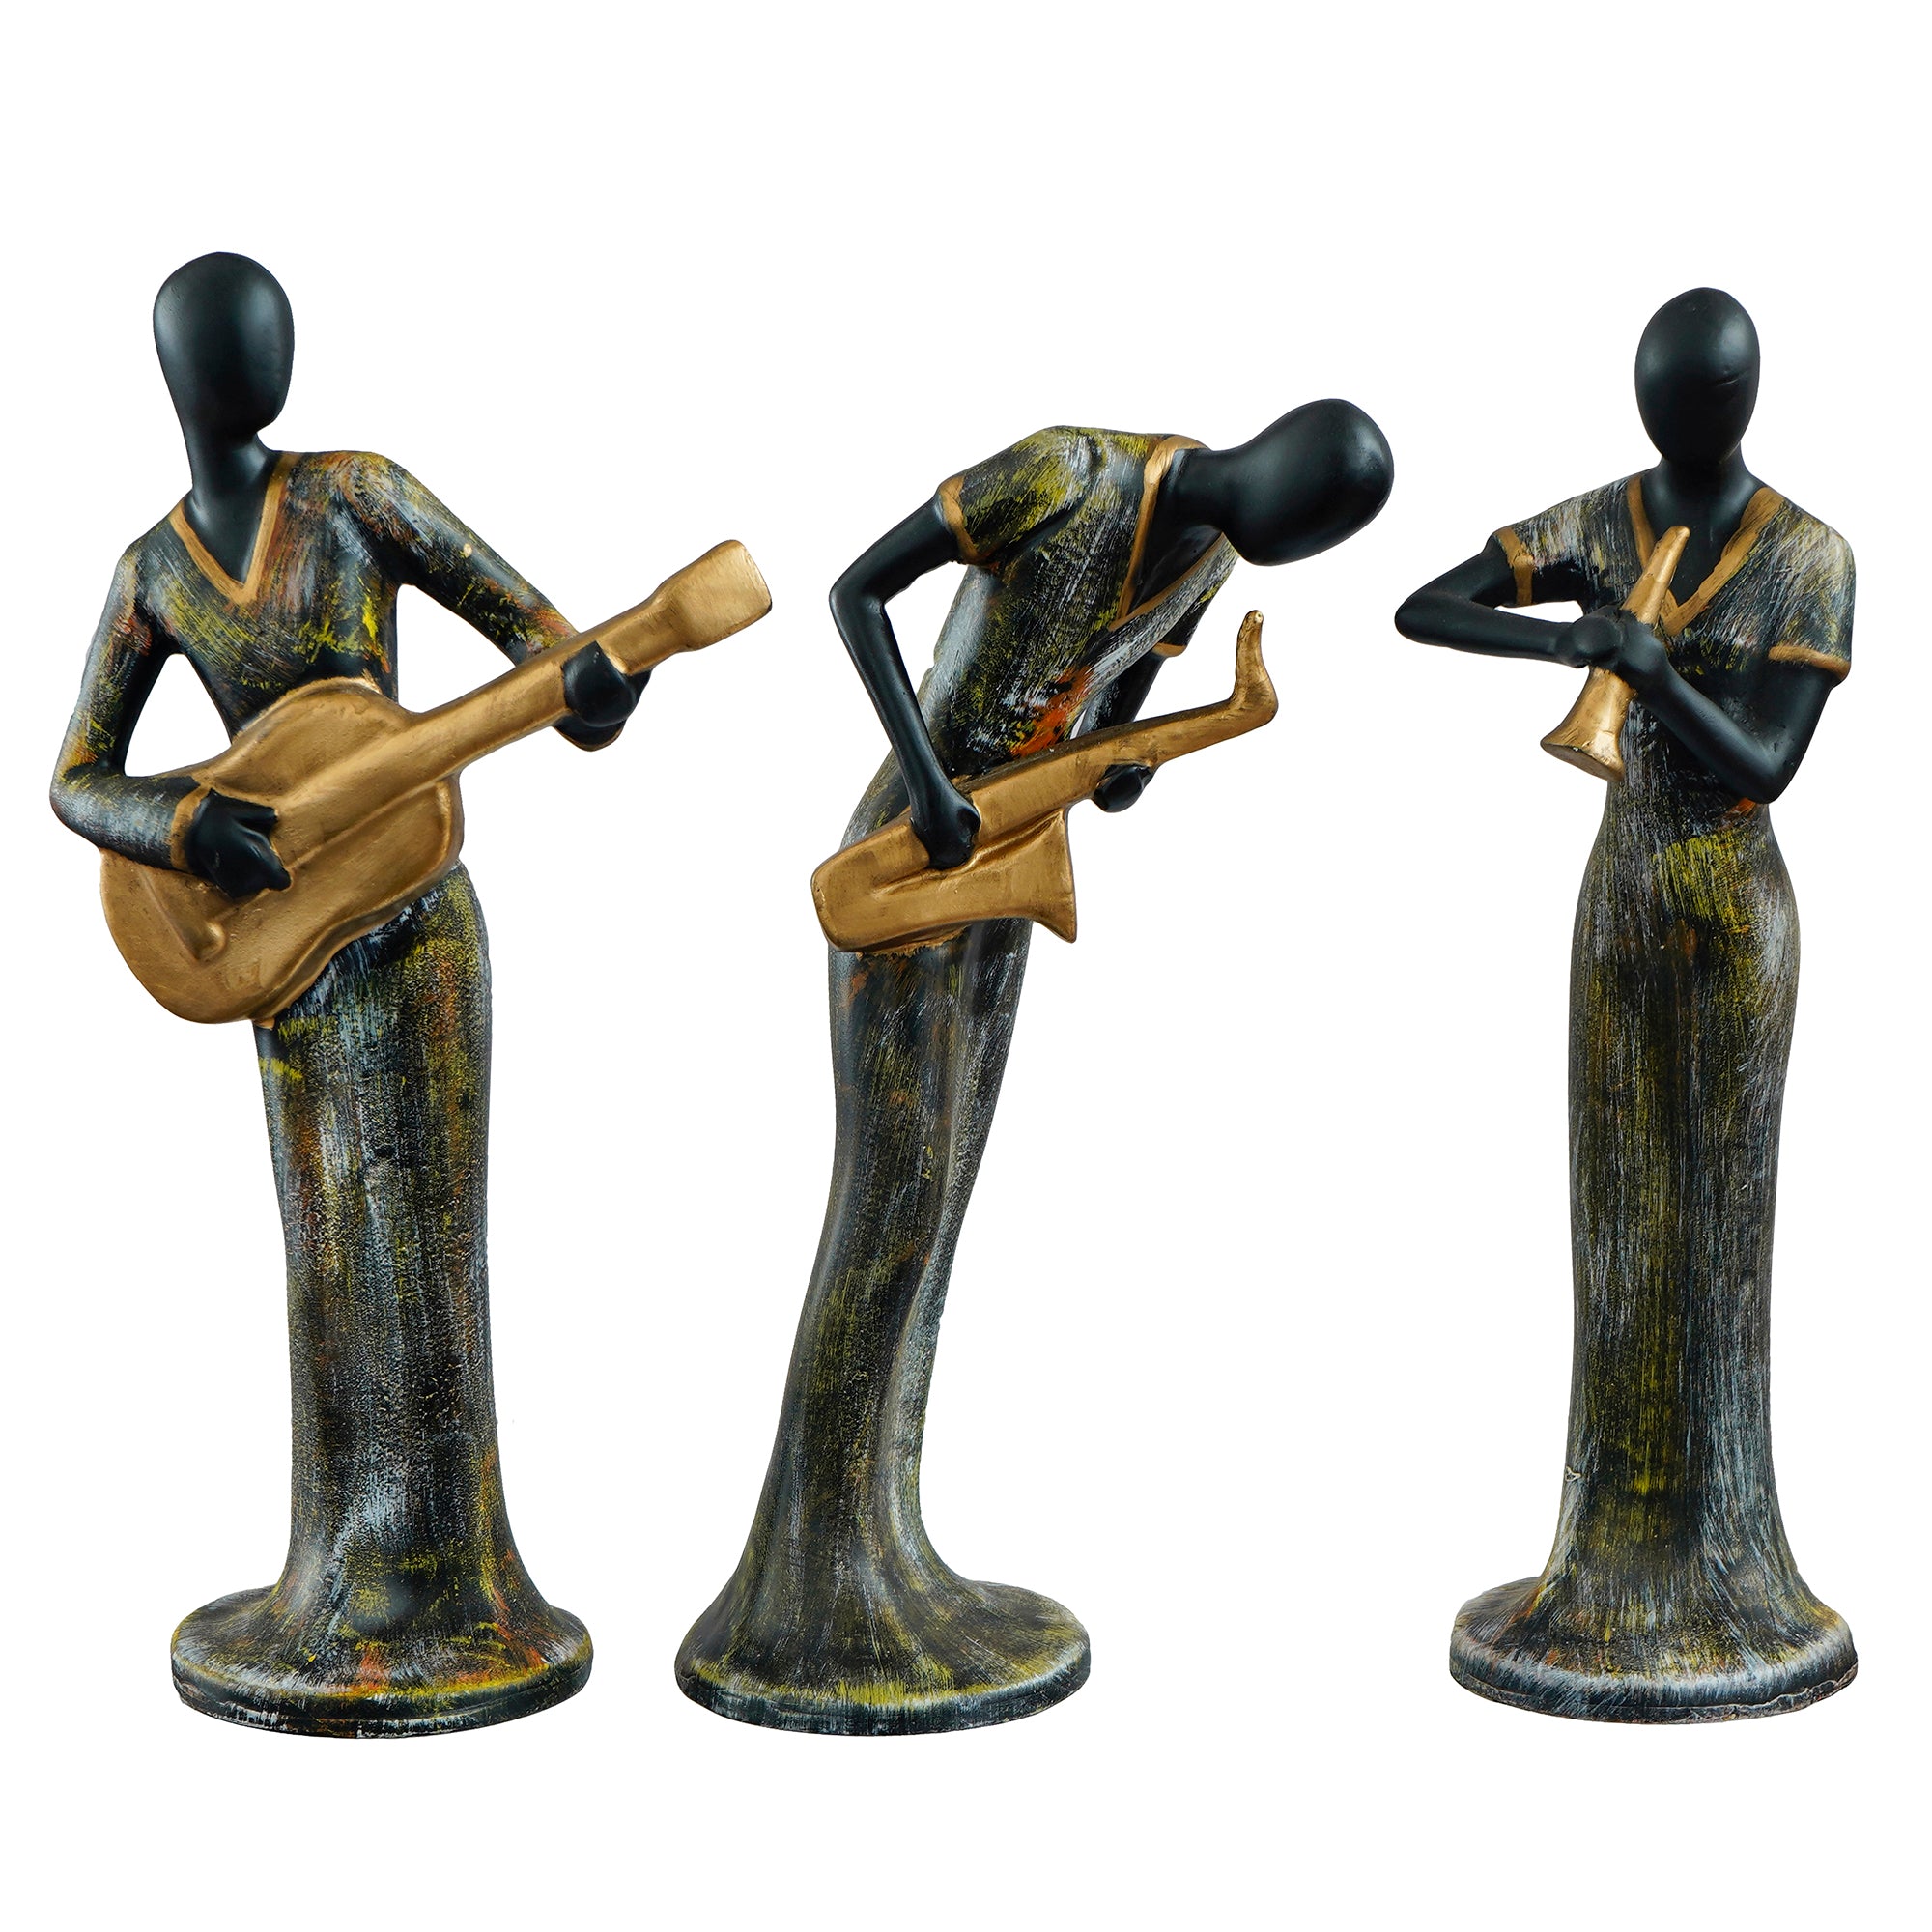 Grey and Black Polyresin Set of 3 Ladies figurines Playing Guitar, Clarinet, Saxophone Musical Instrument Handcrafted Decorative Showpiece 2